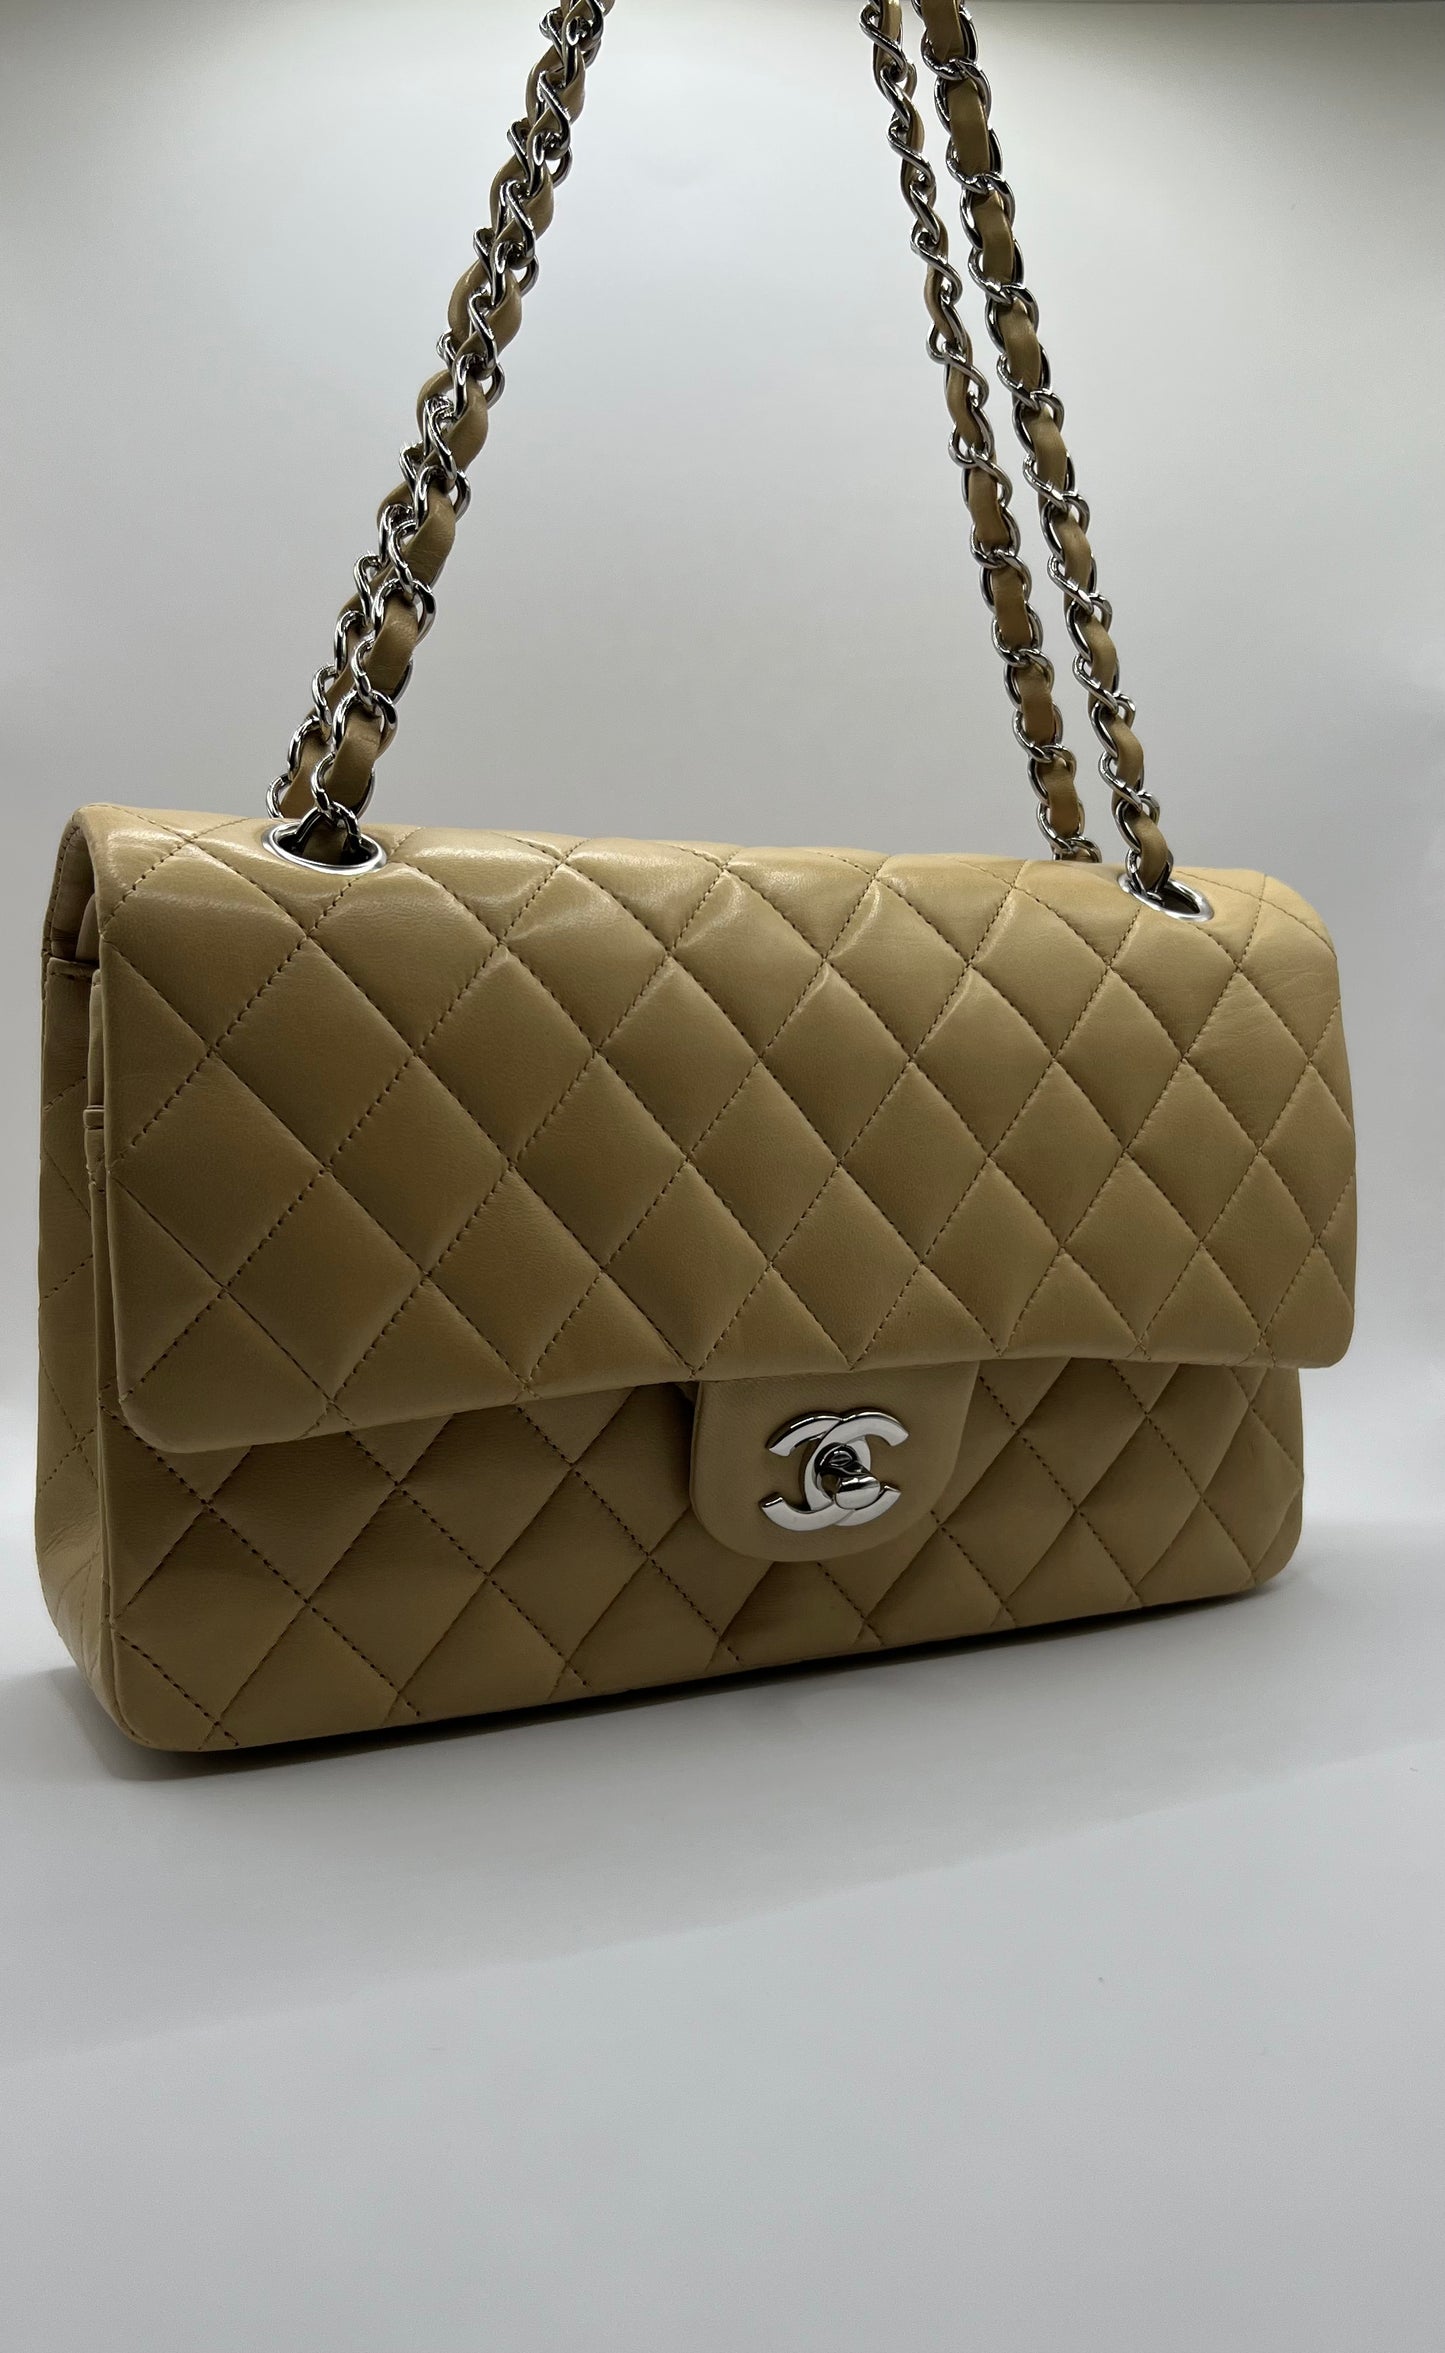 Chanel classic double flap